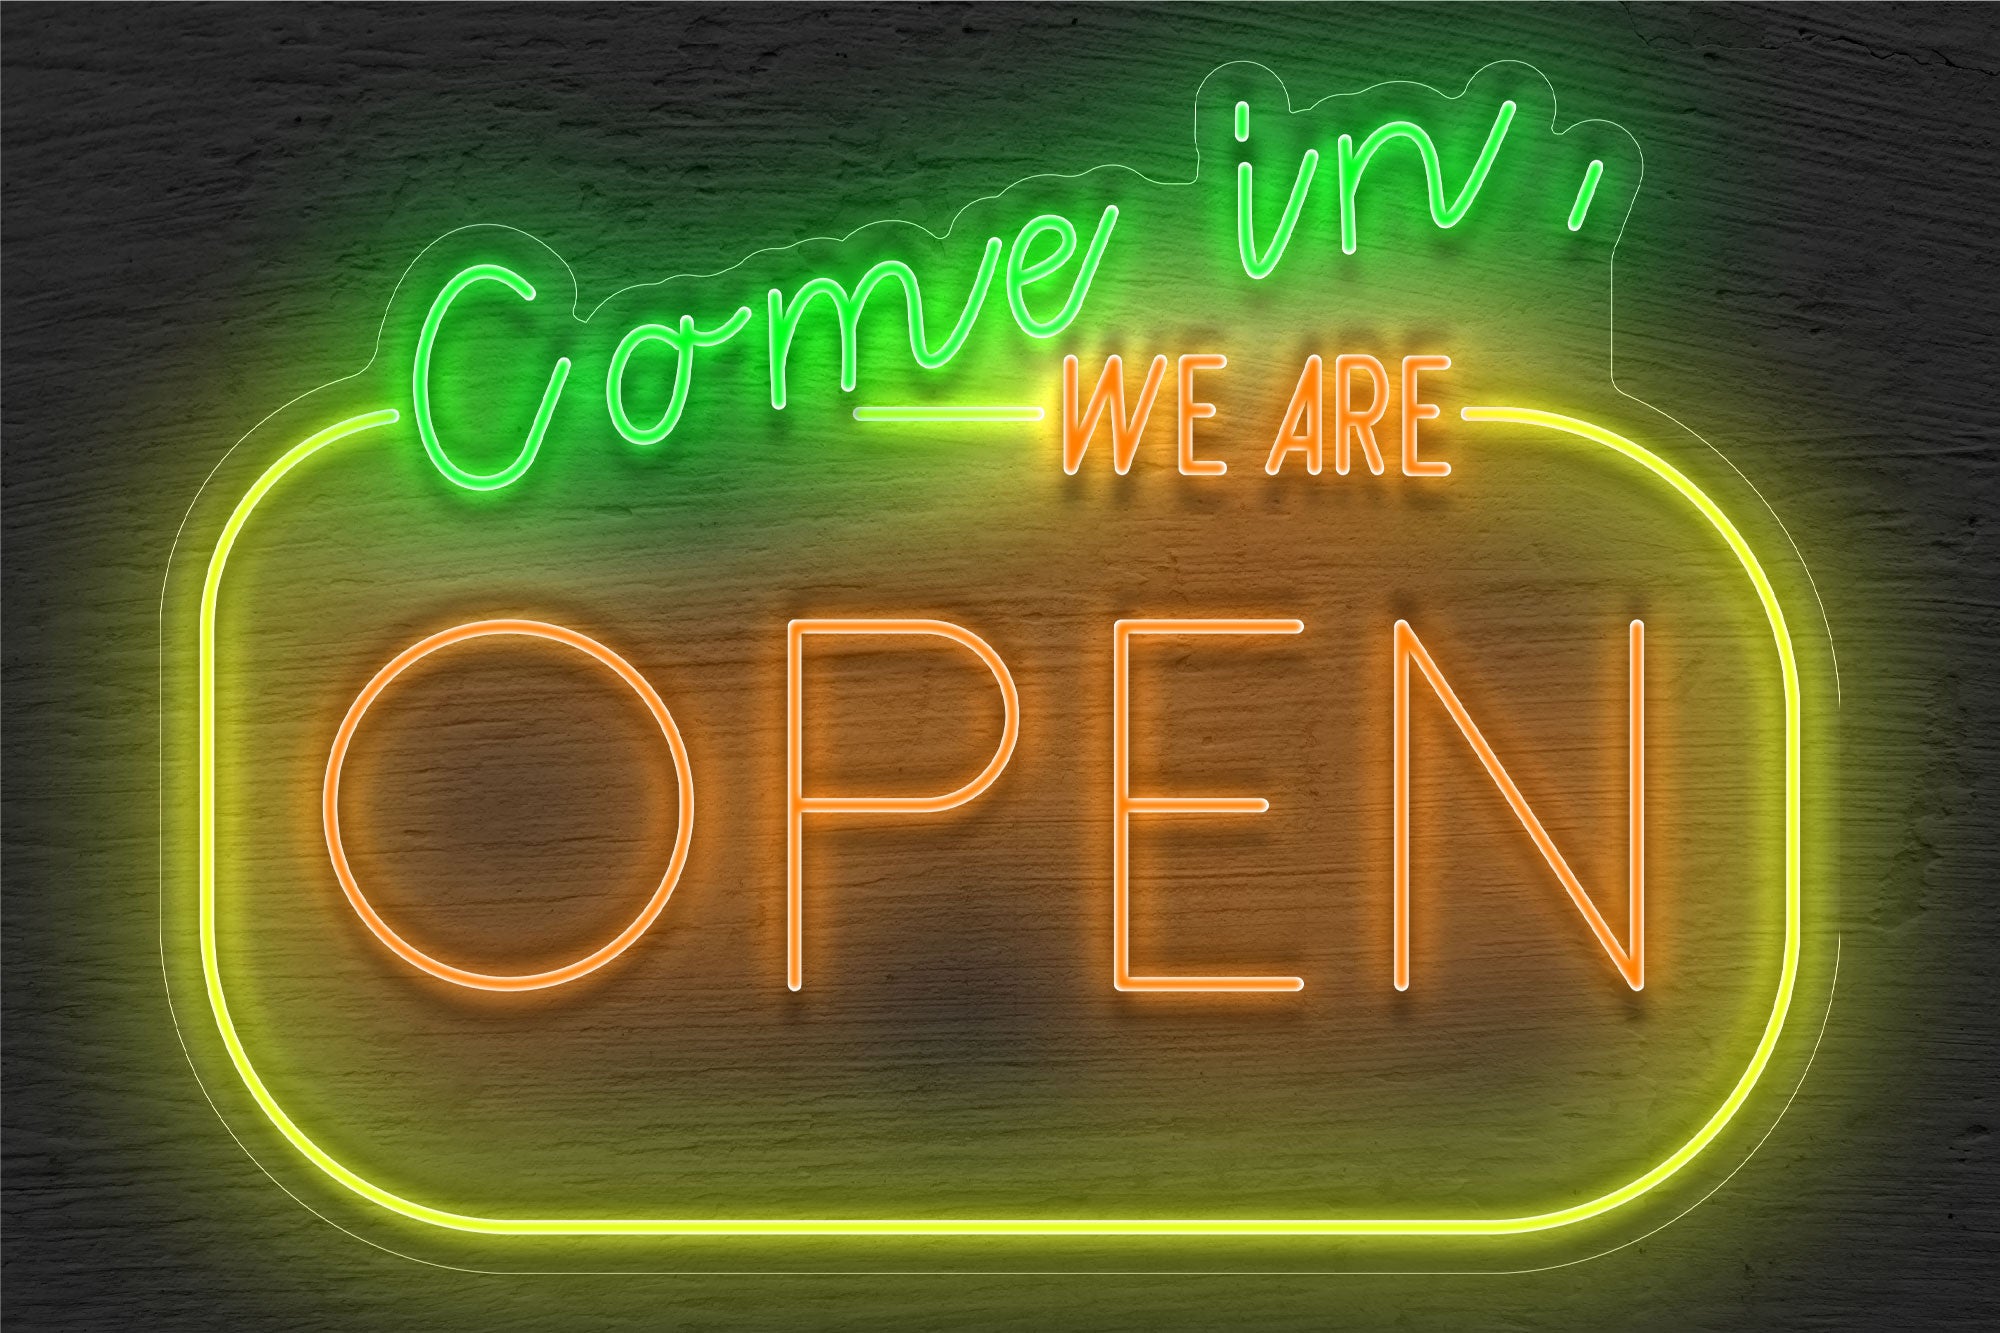 Multi-color "Come in WE ARE OPEN" LED Neon Sign